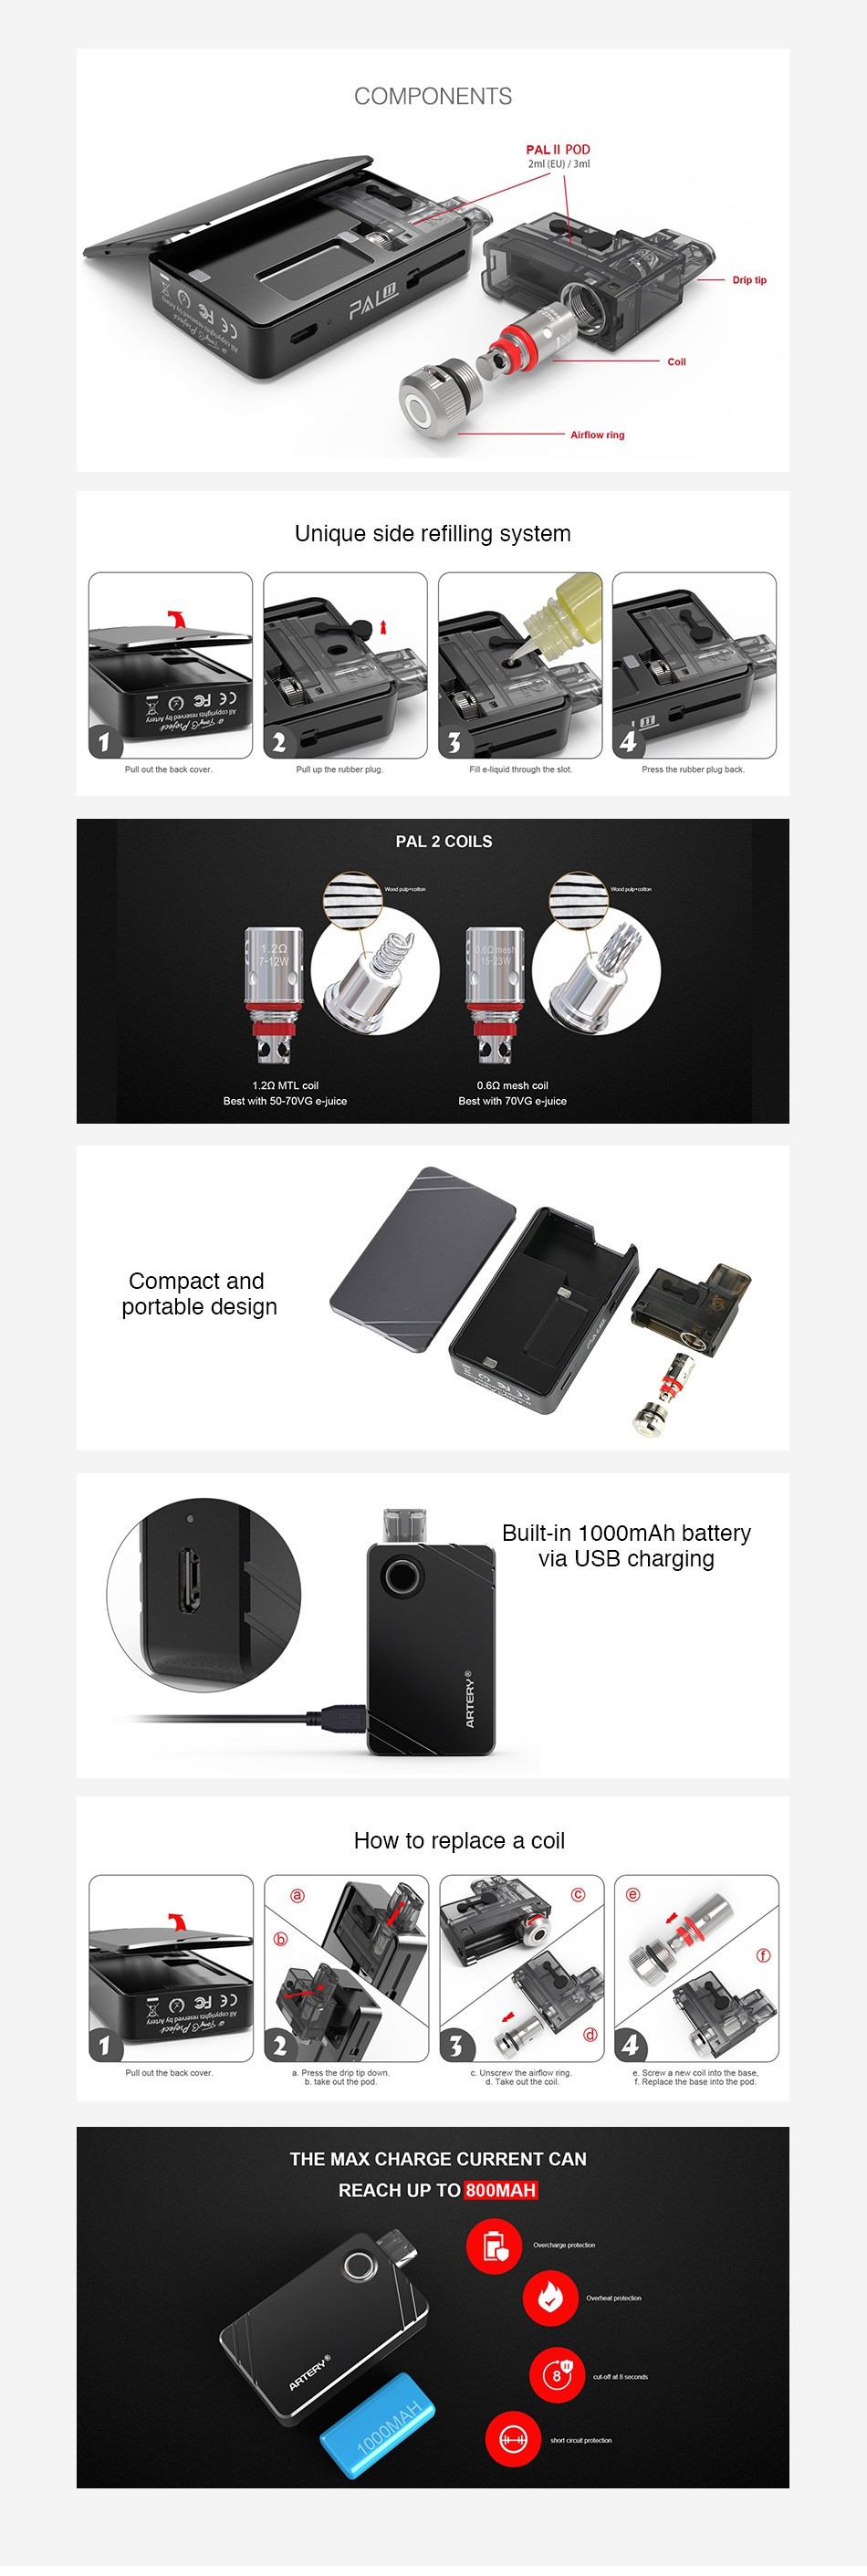 Artery PAL II Pod Starter Kit 1000mAh COMPONENTS Unique side refilling syster ct and portable design Built in 1000mAh battery via USB charging How to replace a coil THE MAX CHARGE CURRENT CAN REACH UP TO 800MAH